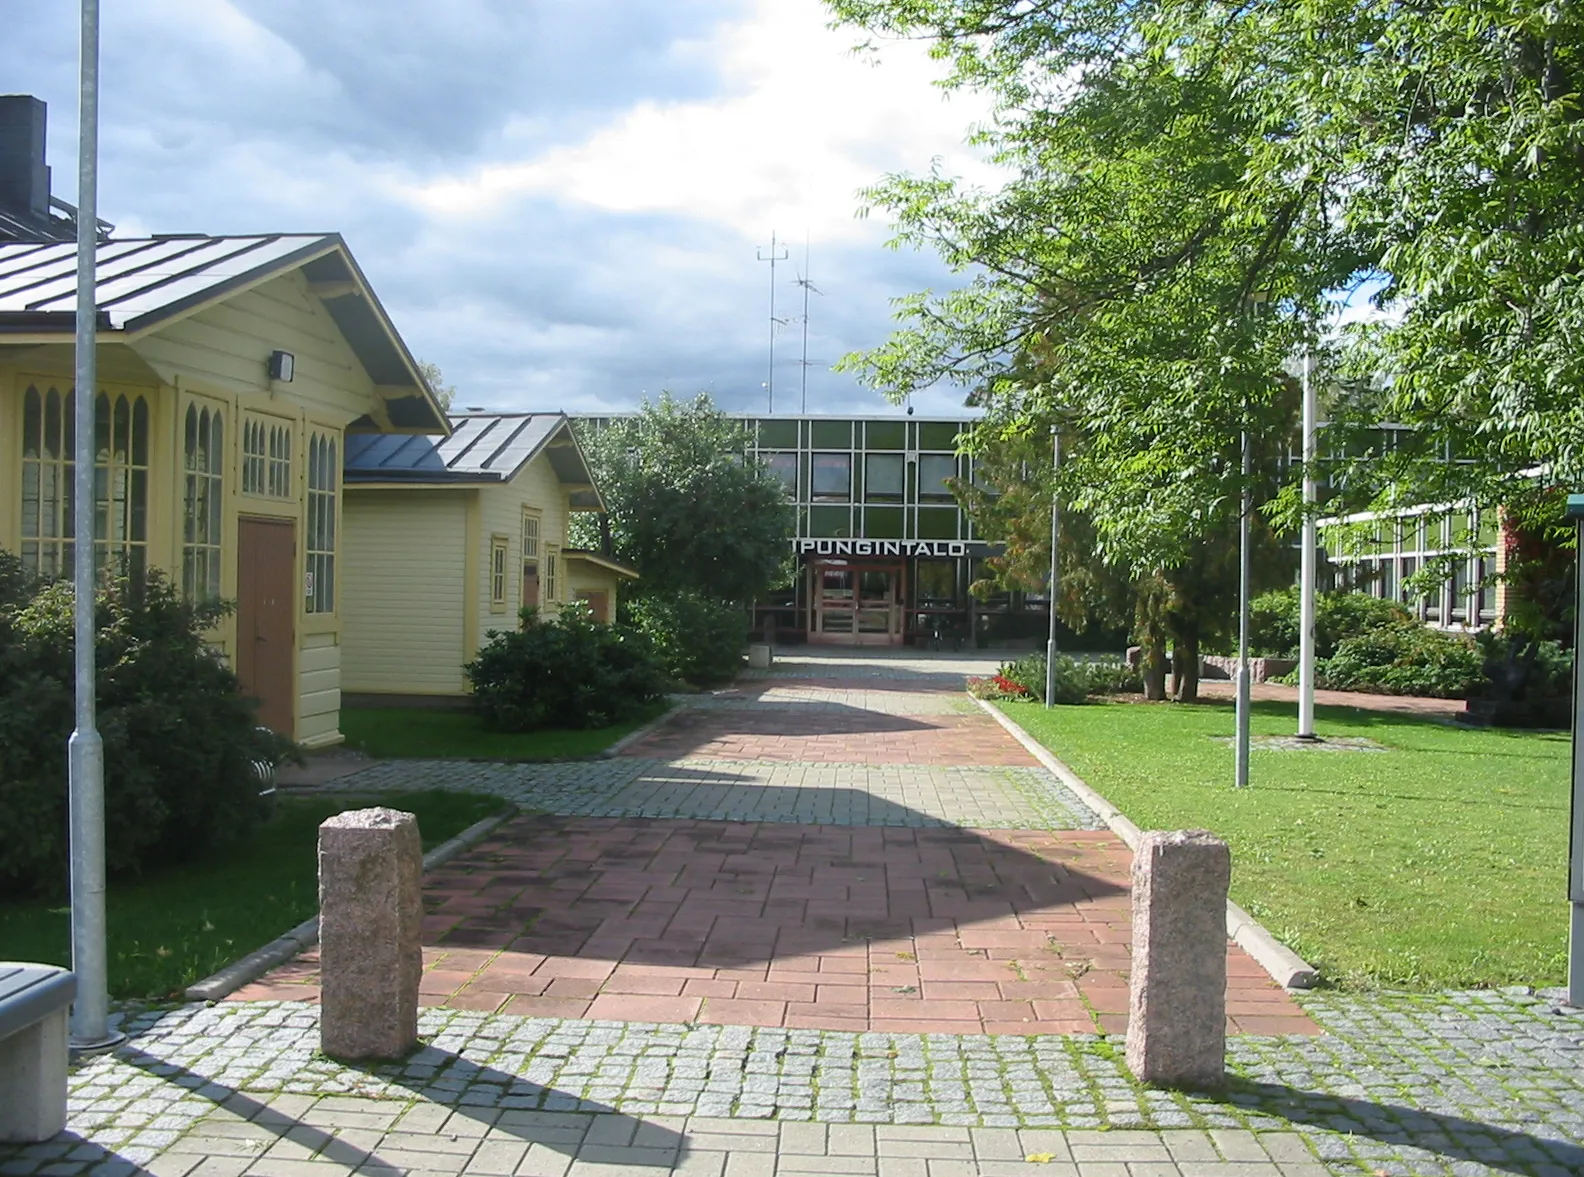 Photo showing: Townhall of Somero, Finland.